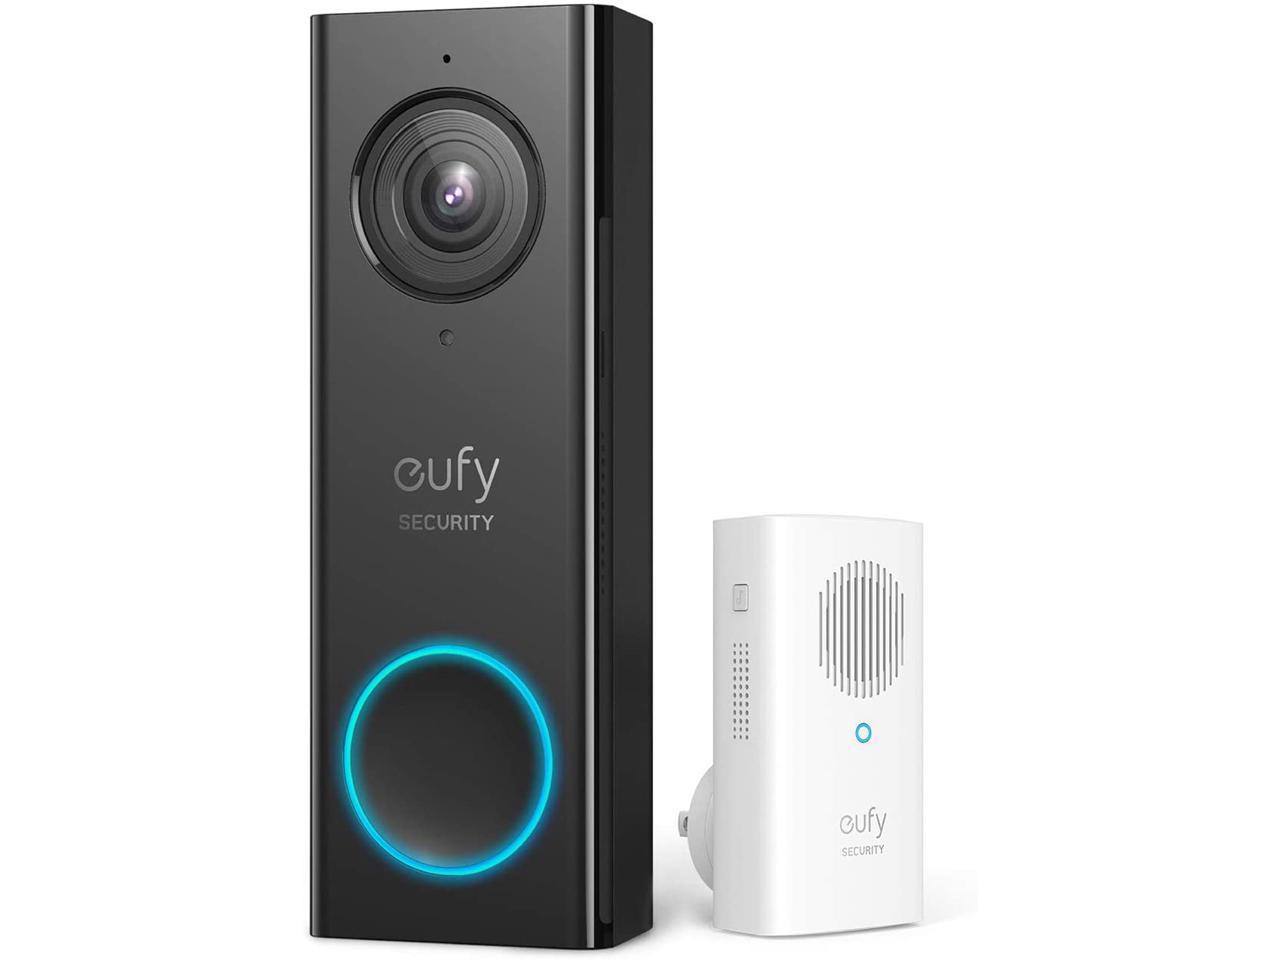 eufy Security Wi-Fi Video Doorbell 2K *RFB* Free Wireless Chime (Requires Existing Doorbell Wires, 16-24 VAC, 30 VA or above) $65